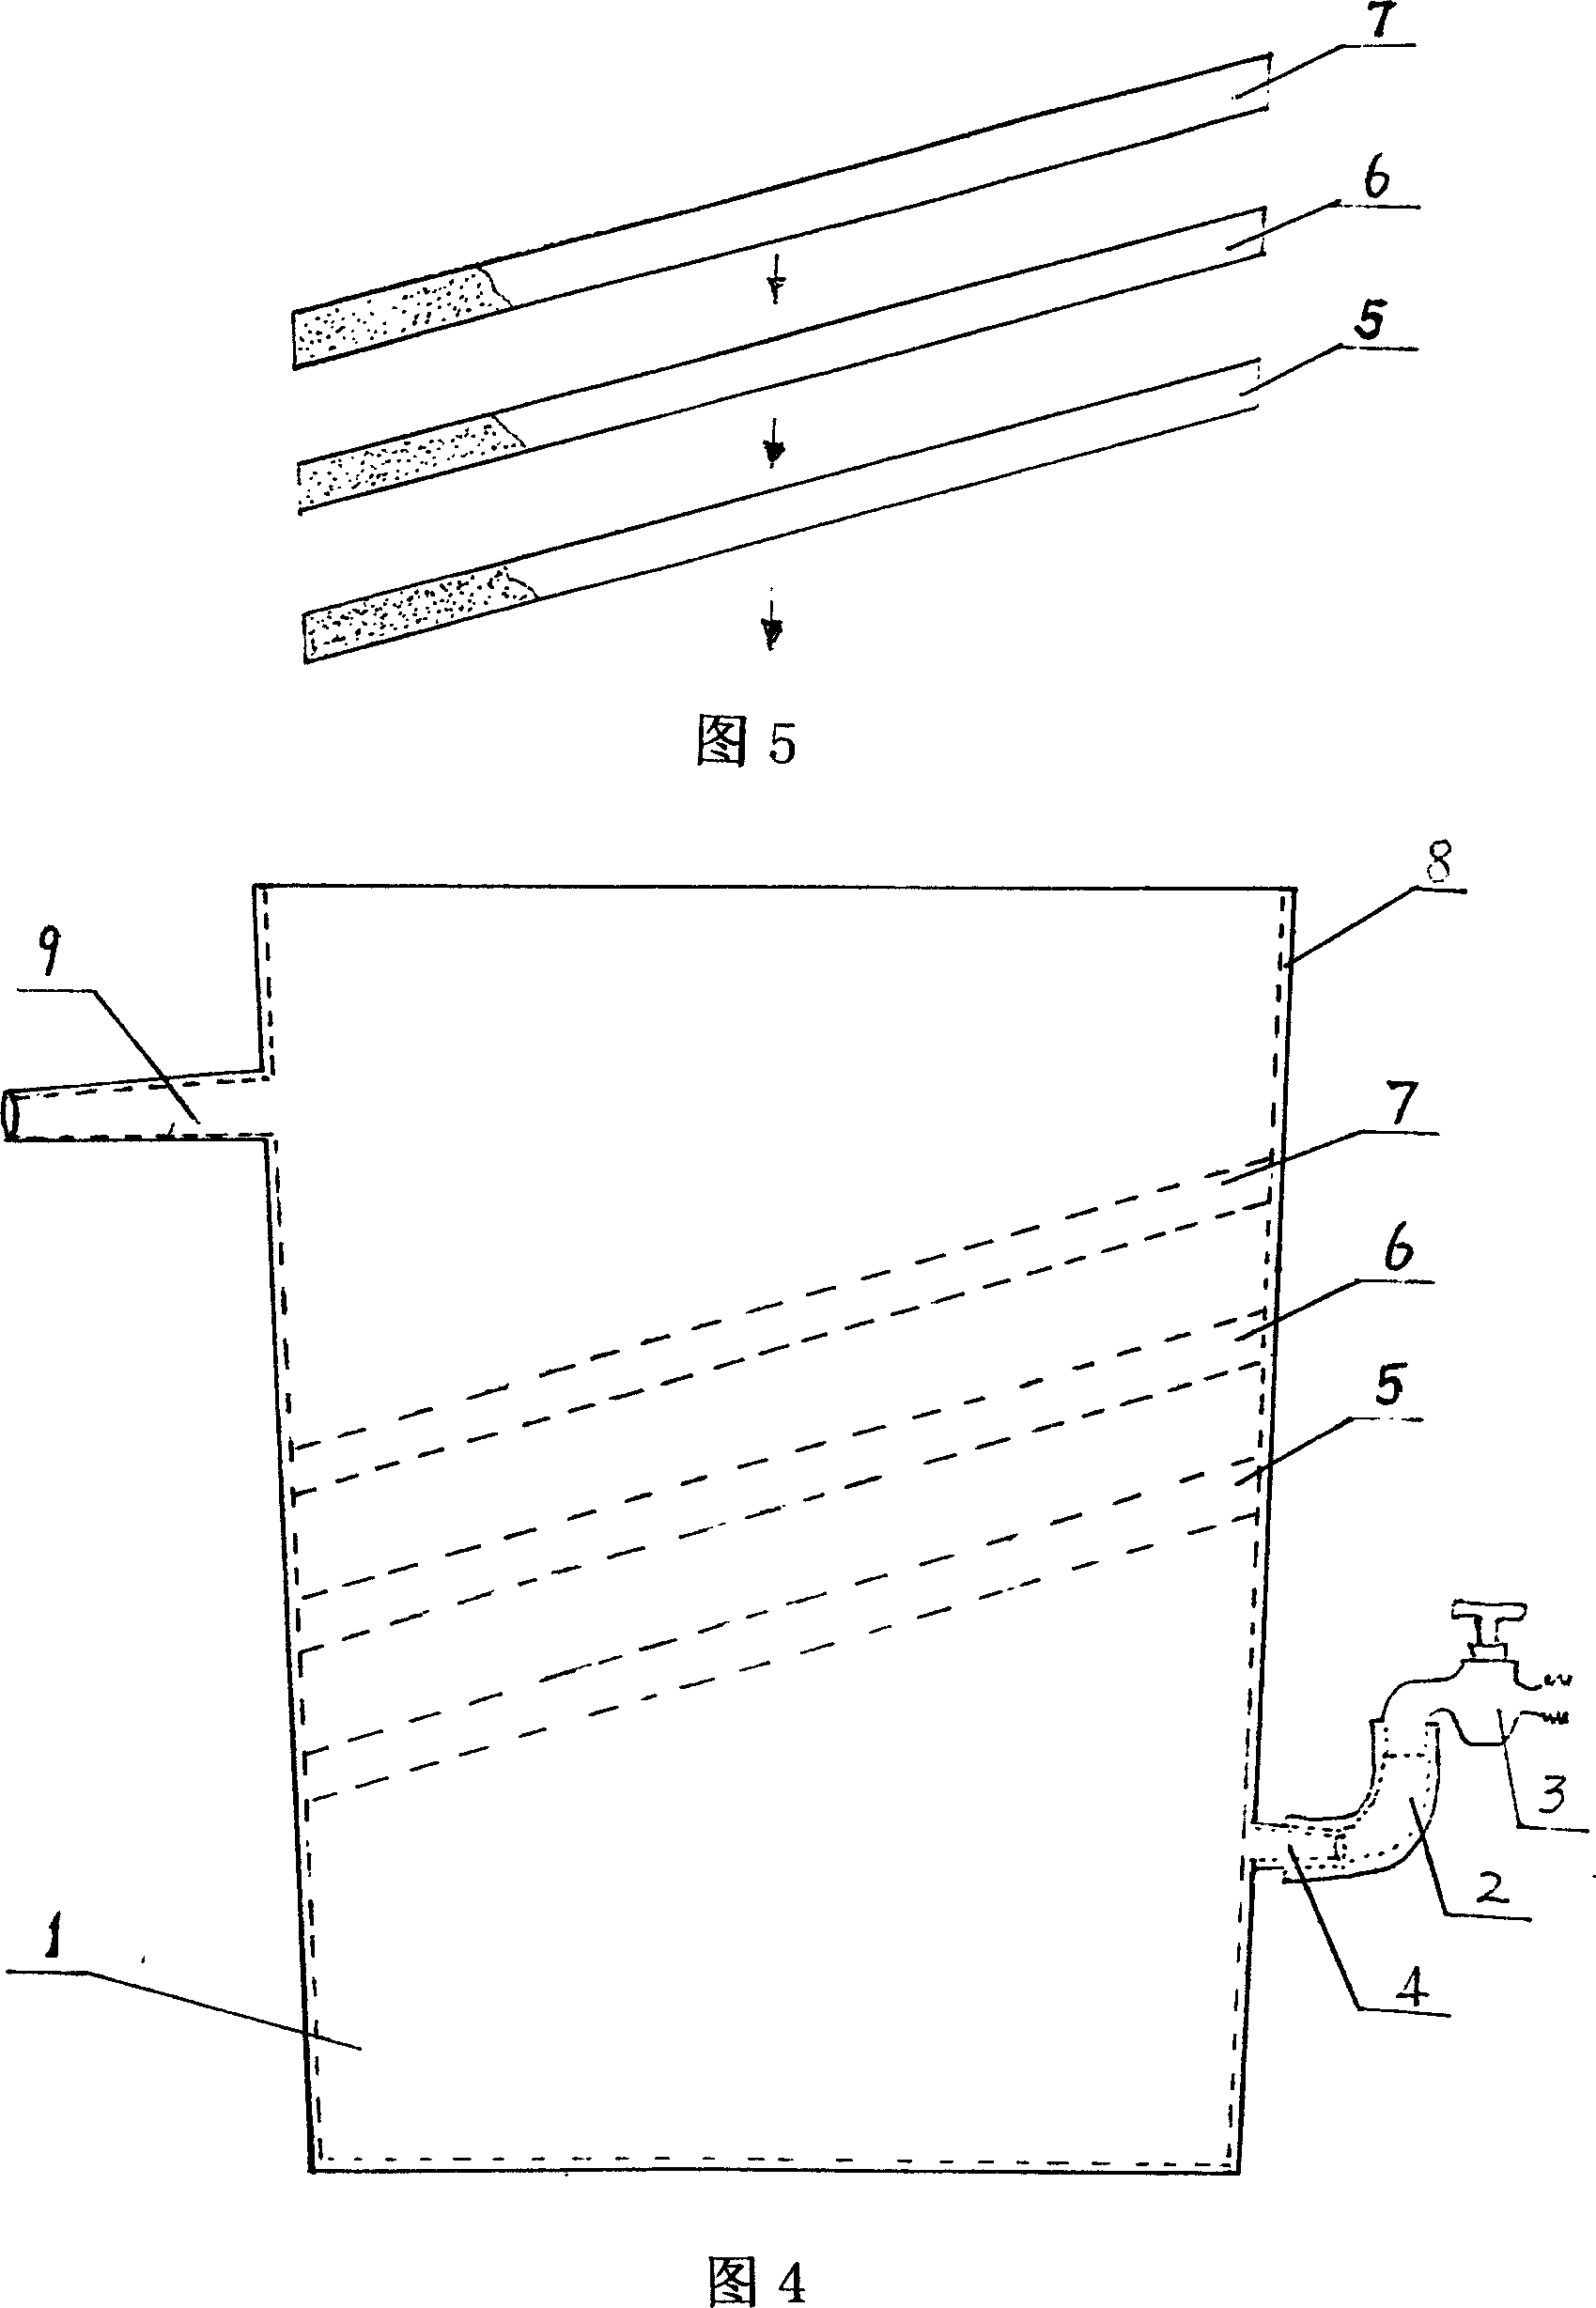 Multi-resource synchronous saving water processing cycle utilization system